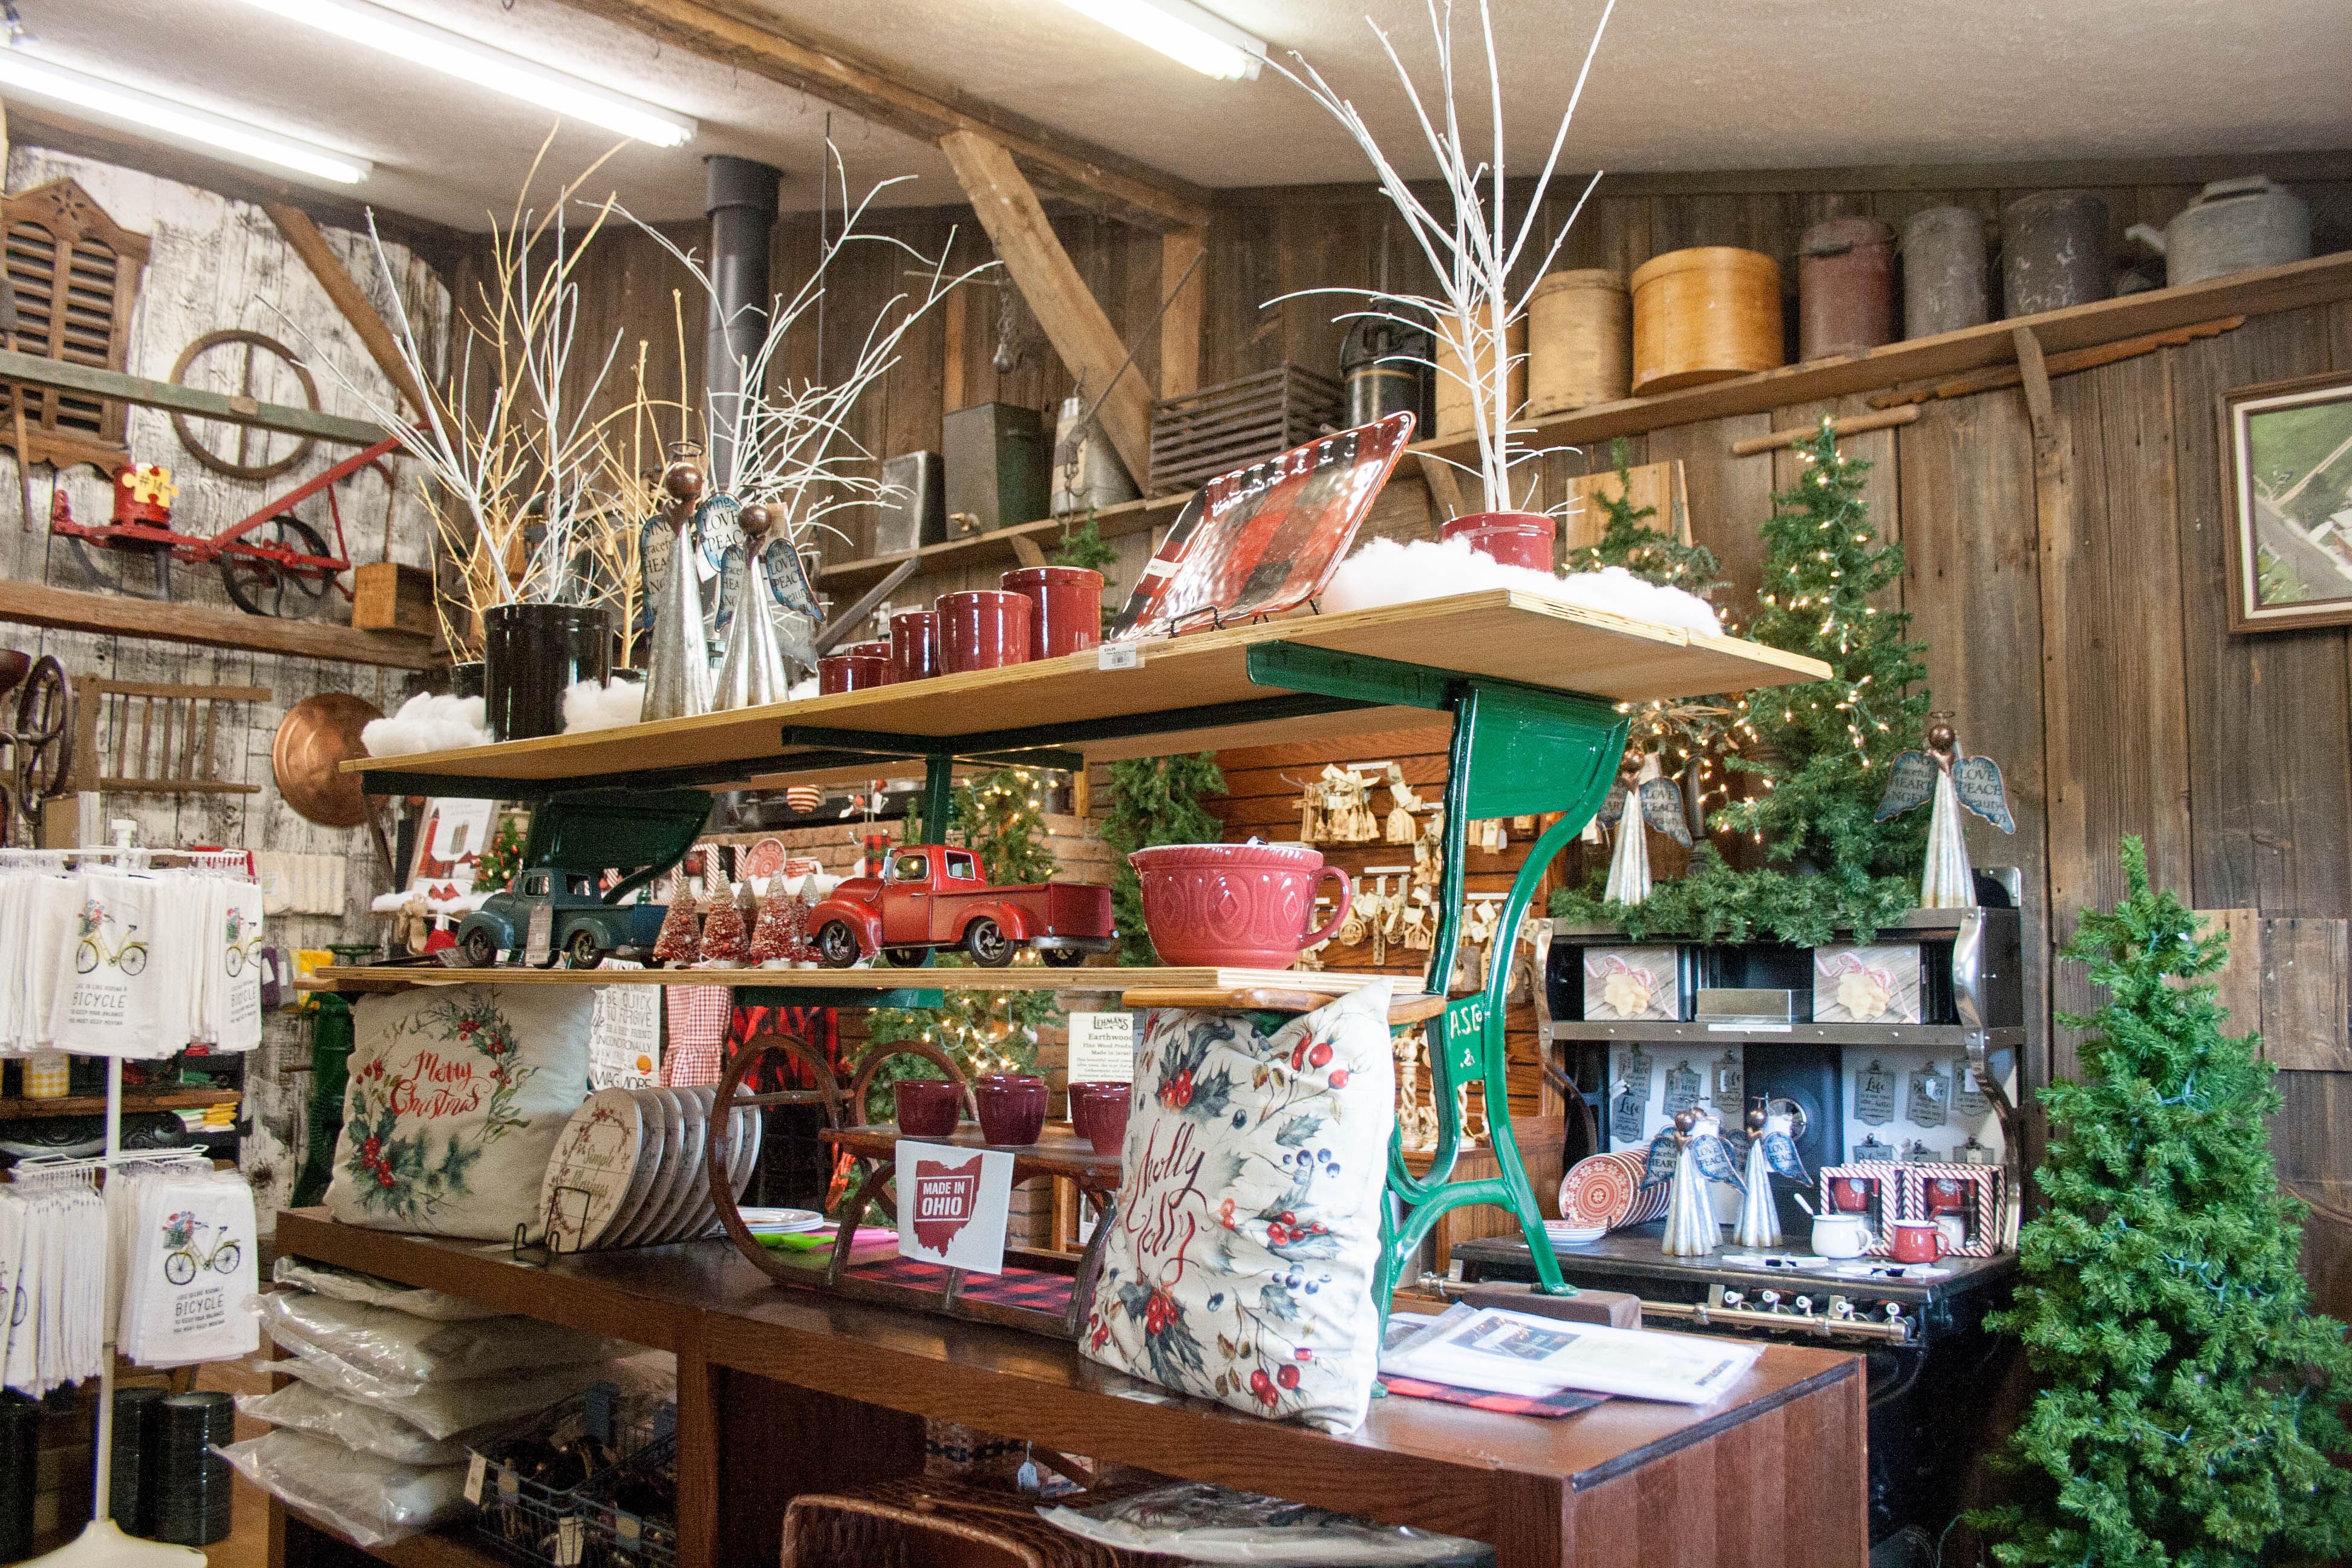 Shop for holiday gifts and ornaments any time in our new Christmas bay.